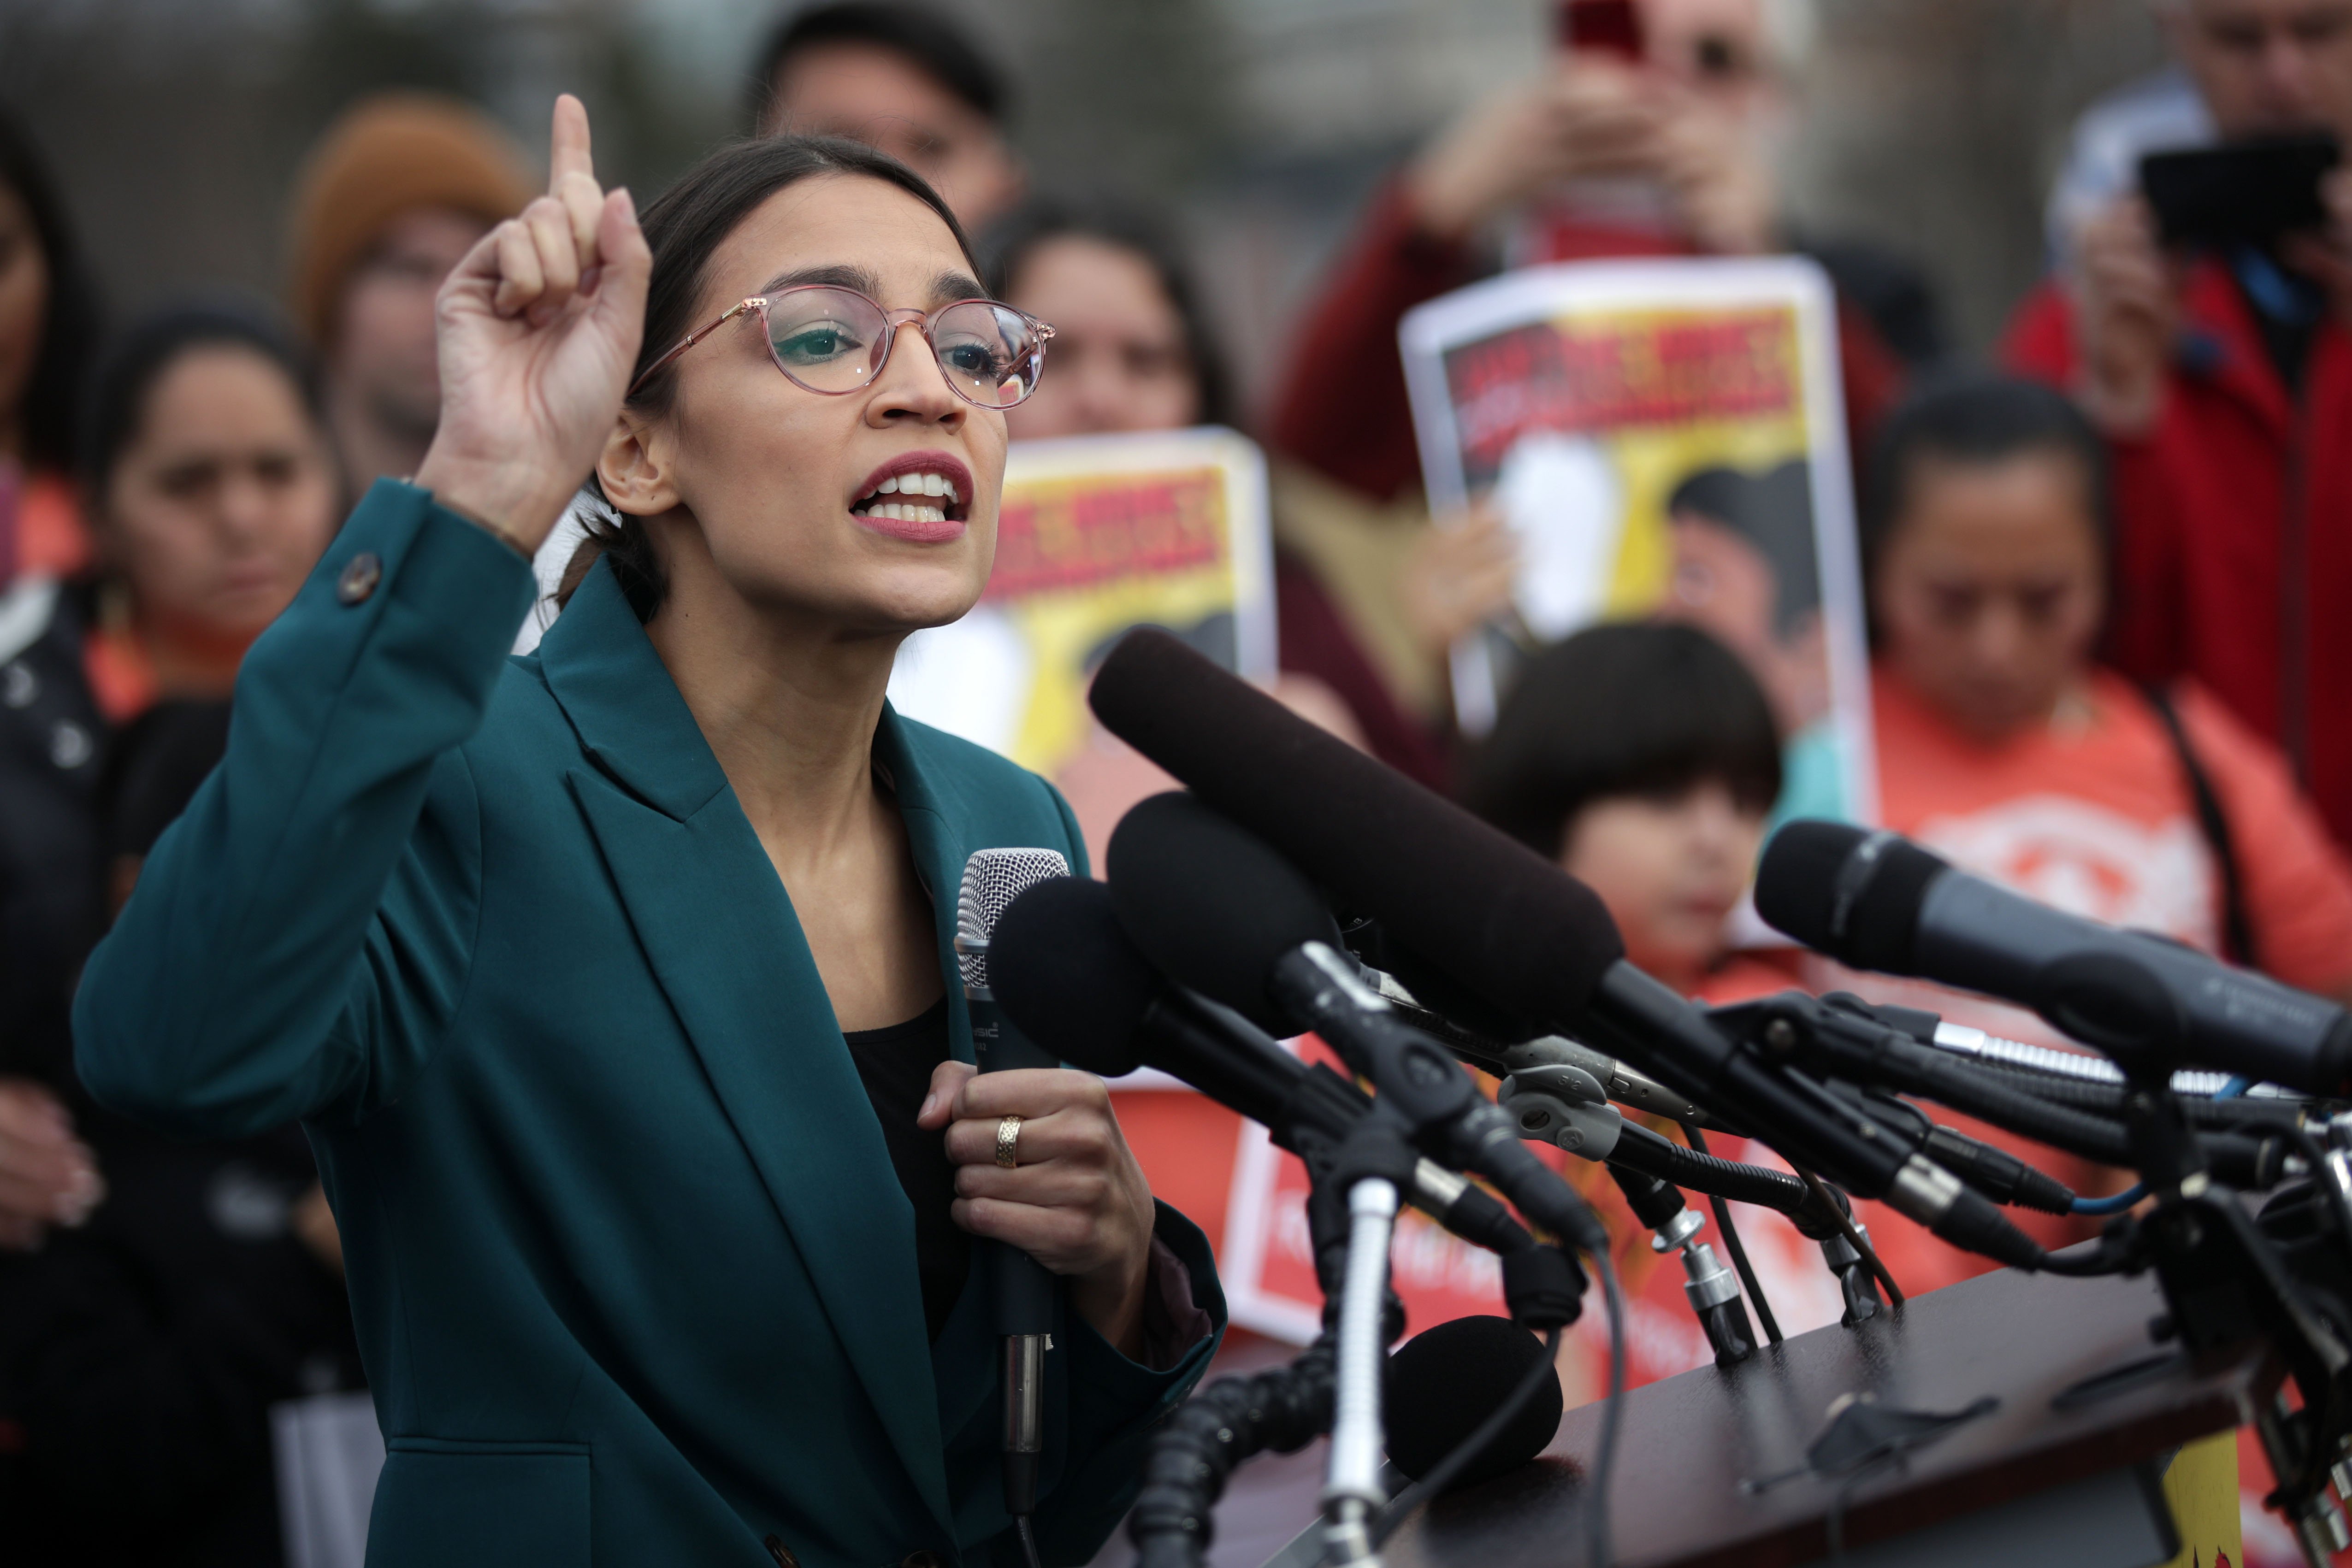 U.S. Rep. Alexandria Ocasio-Cortez (D-NY) speaks during a news conference at the East Front of the U.S. Capitol February 7, 2019 in Washington, DC ... (Photo by Alex Wong/Getty Images)